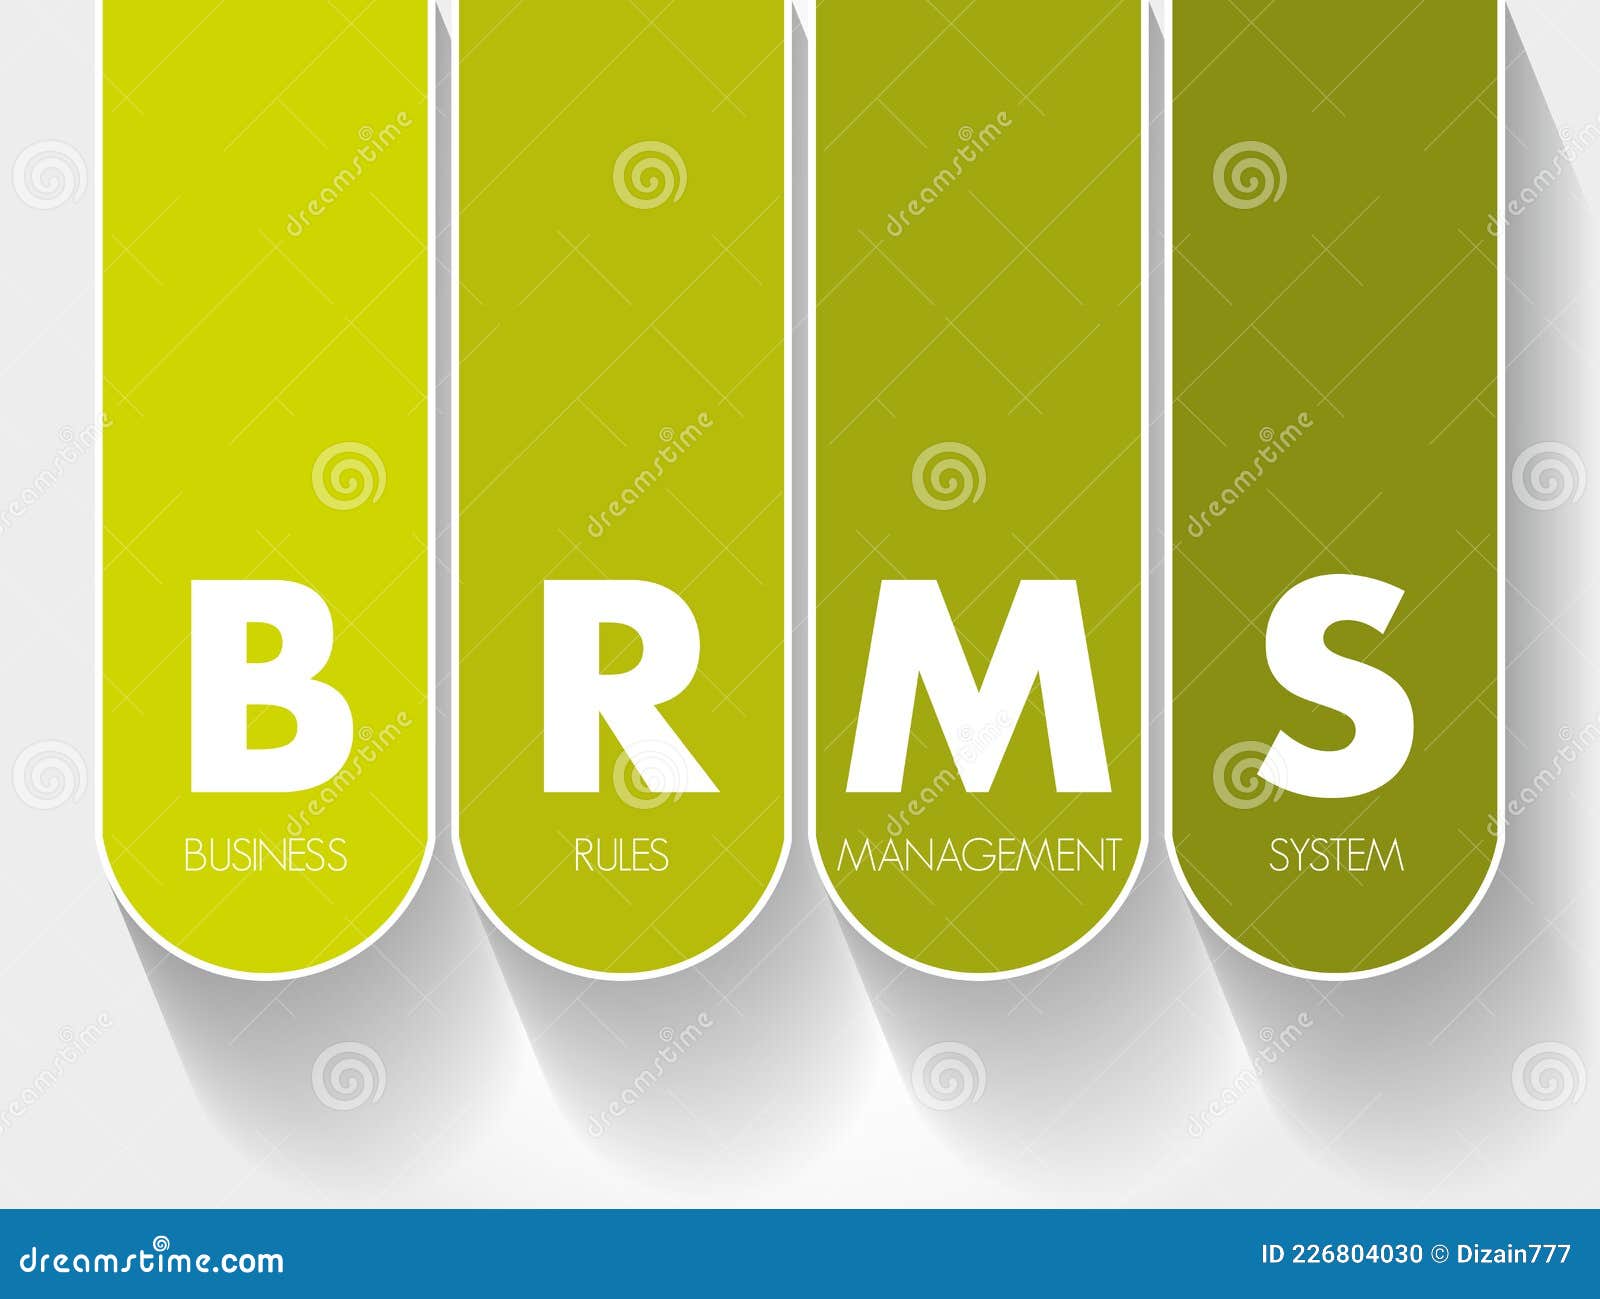 Brms